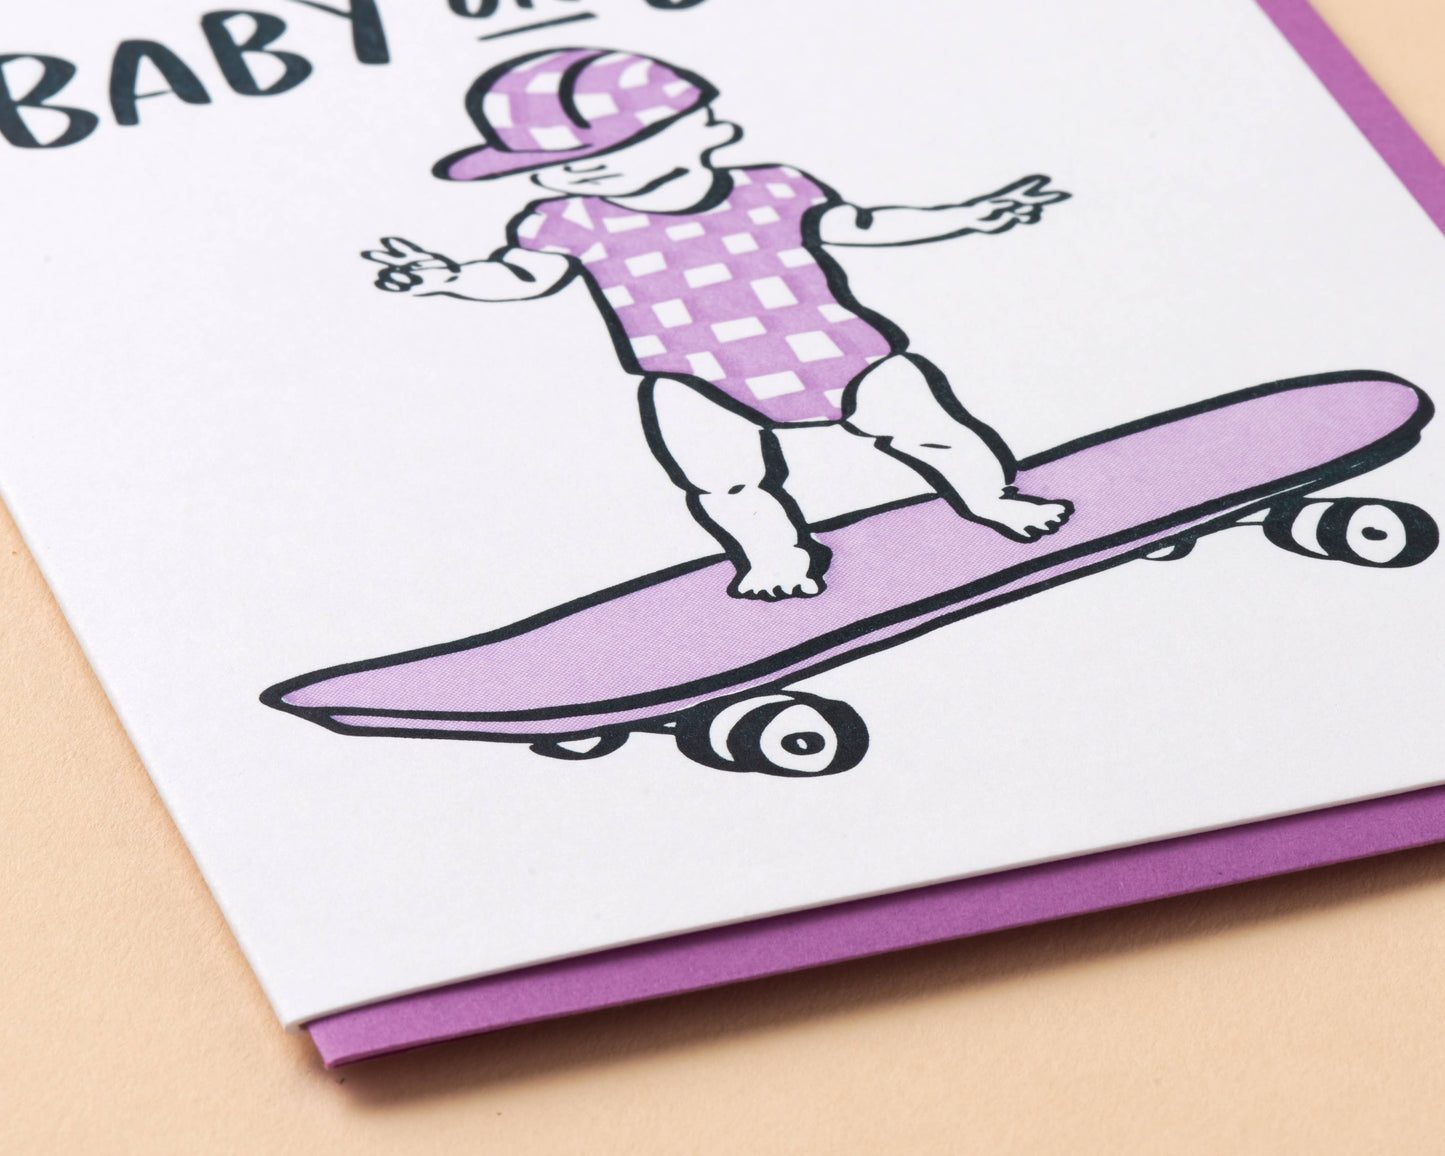 Baby on Board Skateboard Letterpress Greeting Card - Baby Announcement